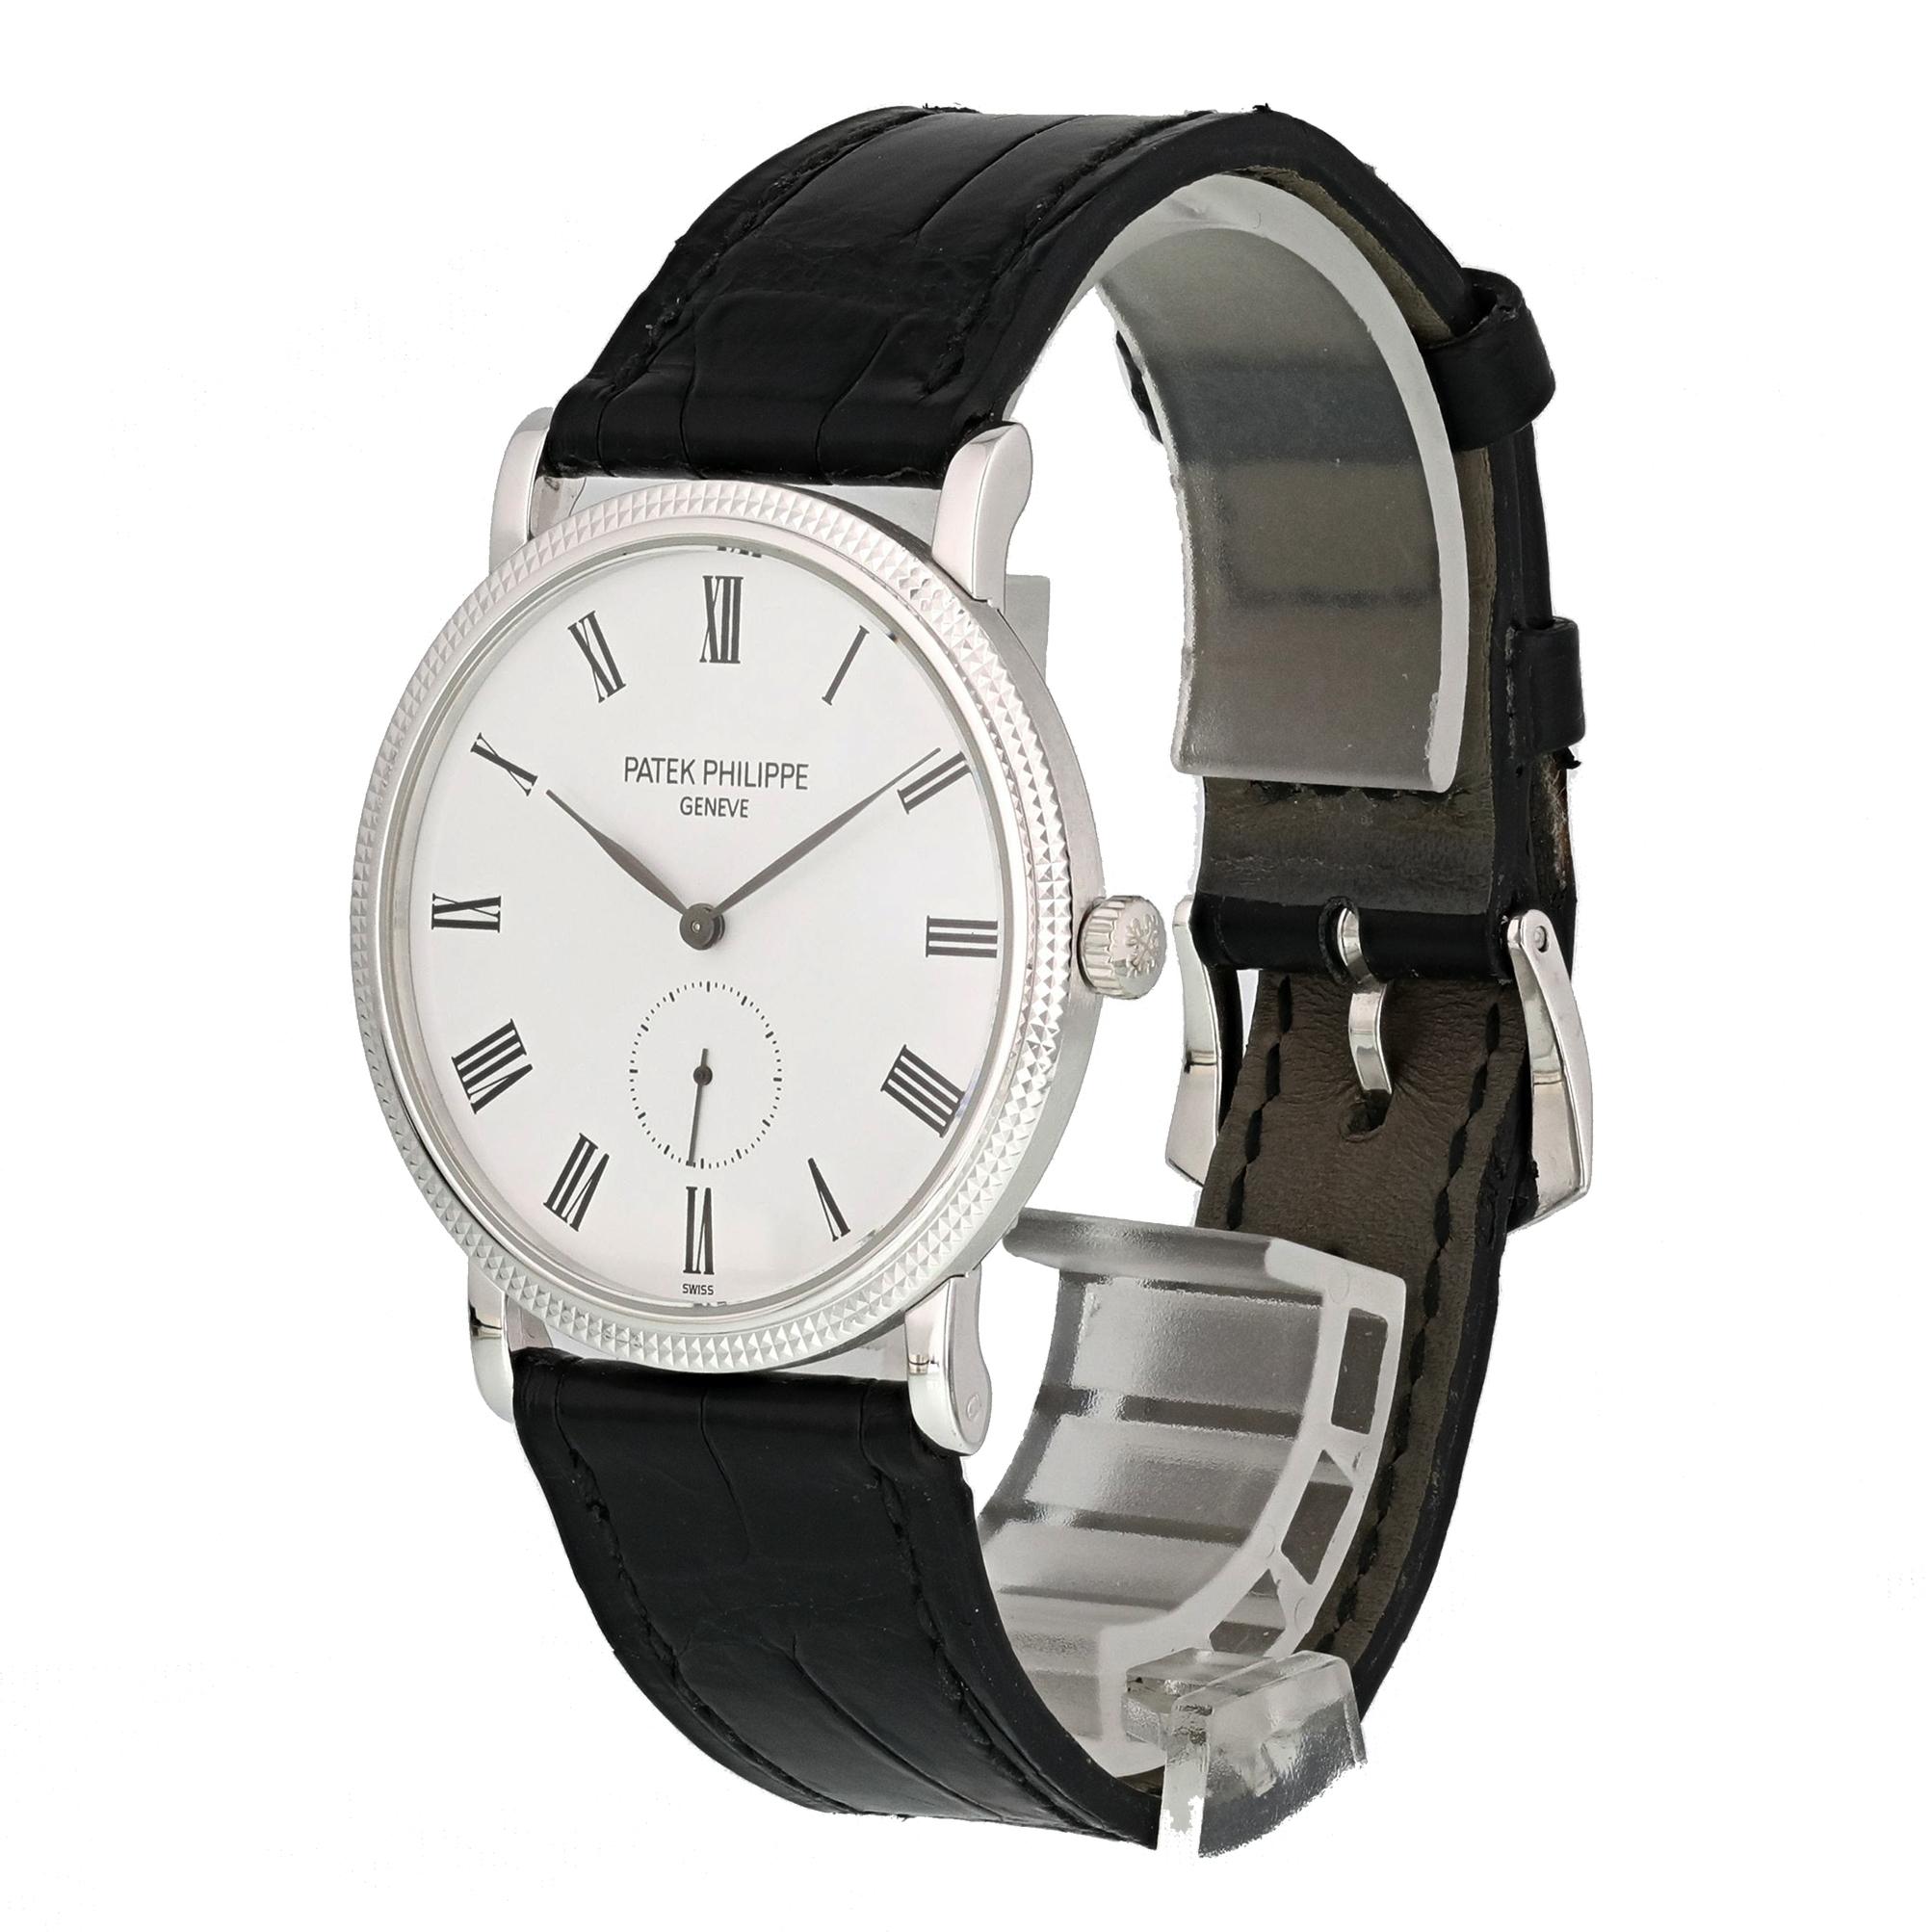 Patek Philippe Calatrava 5119G-001 White Gold Mens Watch.
36mm 18K White Gold case. 
White Gold None bezel. 
White dial with gold hands and roman numeral hour markers. 
Leather Alligator Strap with Buckle. 
Will fit up to a 7.50-inch wrist.